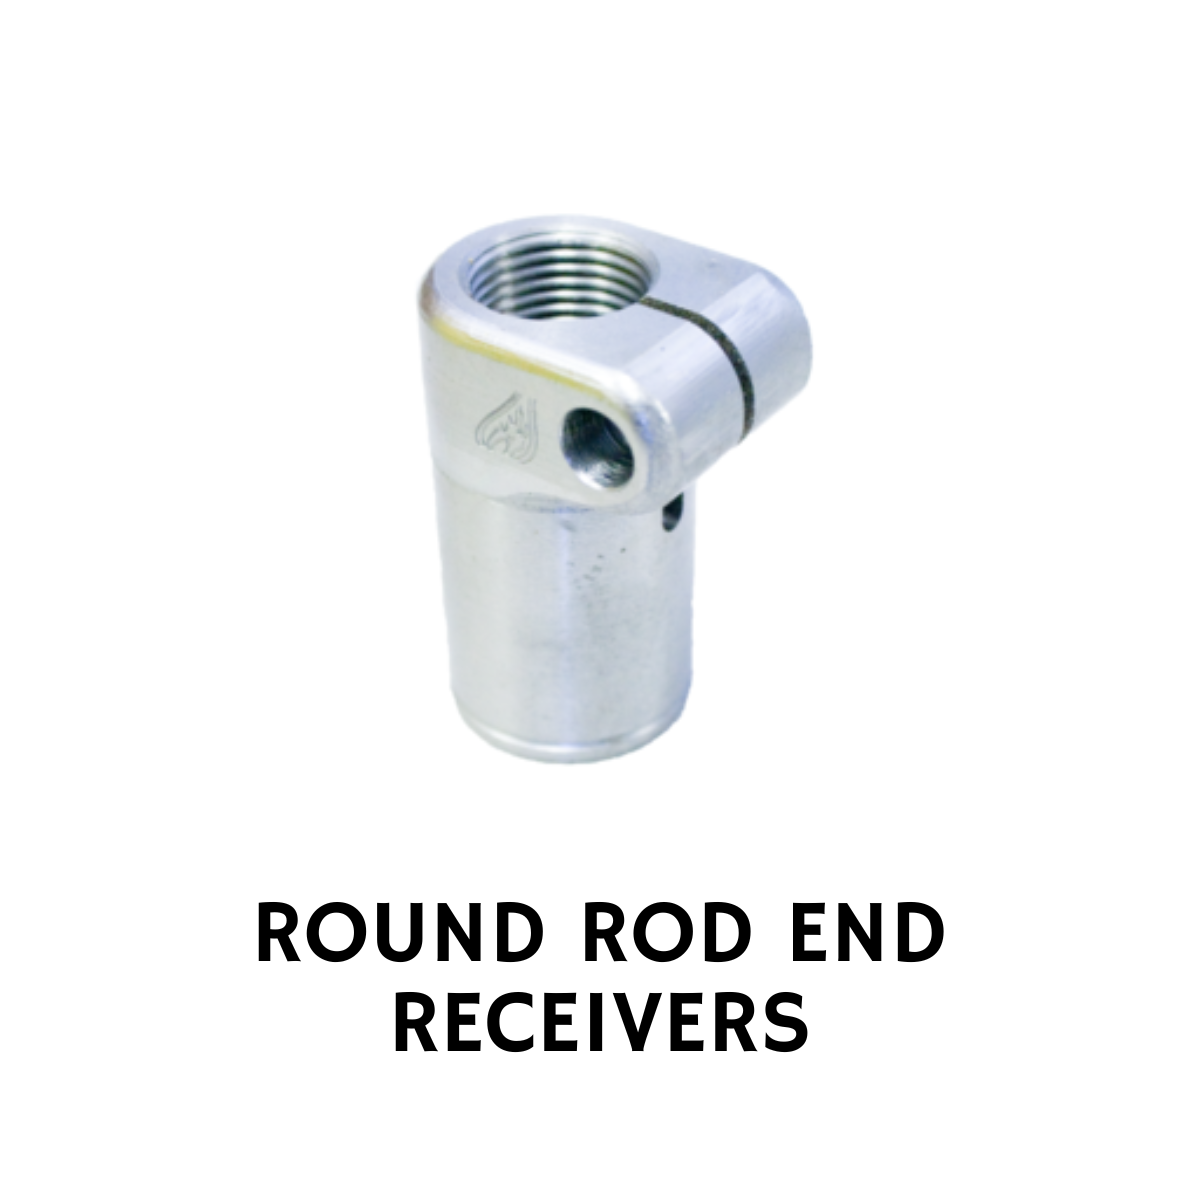 ROUND ROD END RECEIVERS